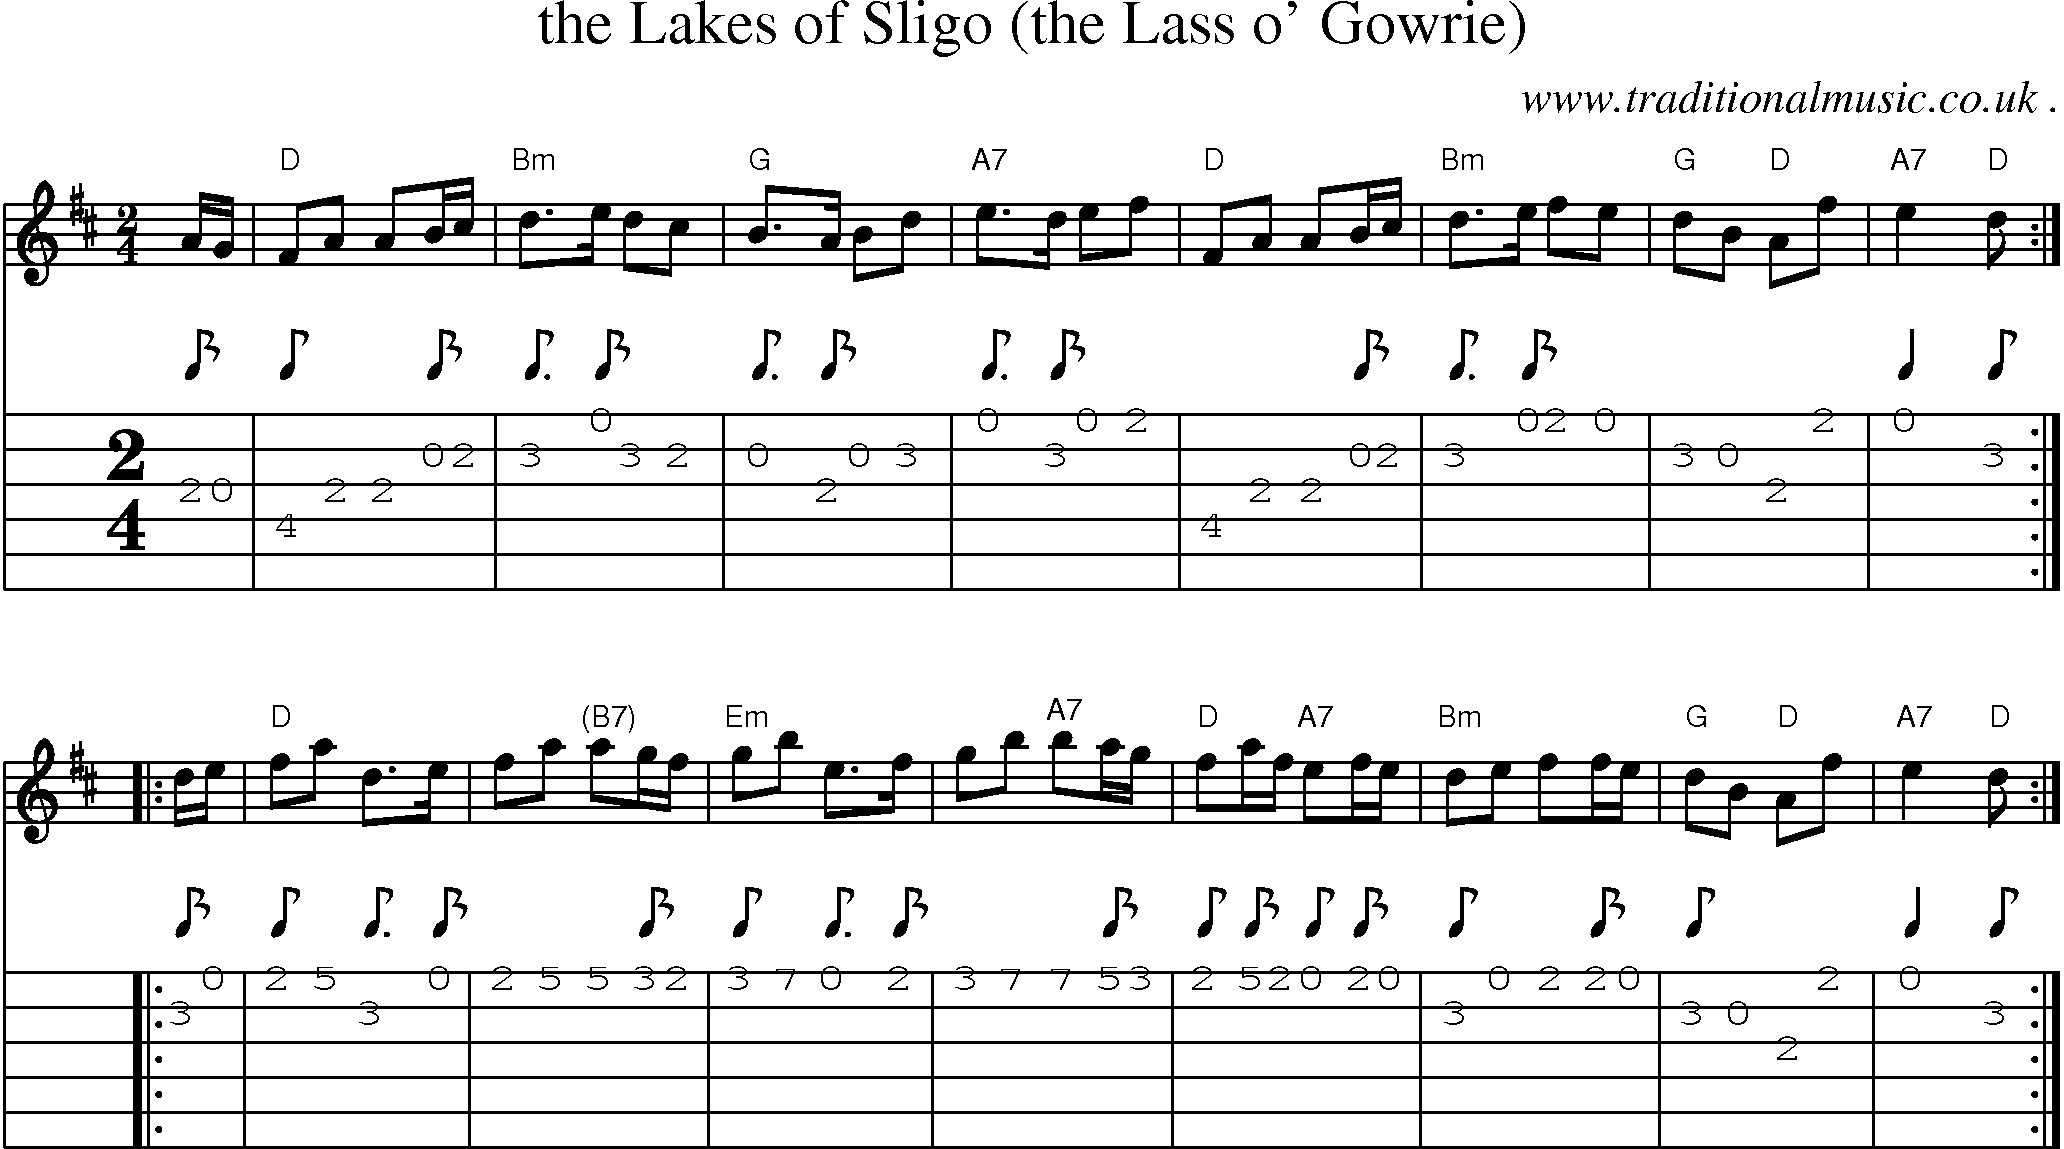 Sheet-music  score, Chords and Guitar Tabs for The Lakes Of Sligo The Lass O Gowrie